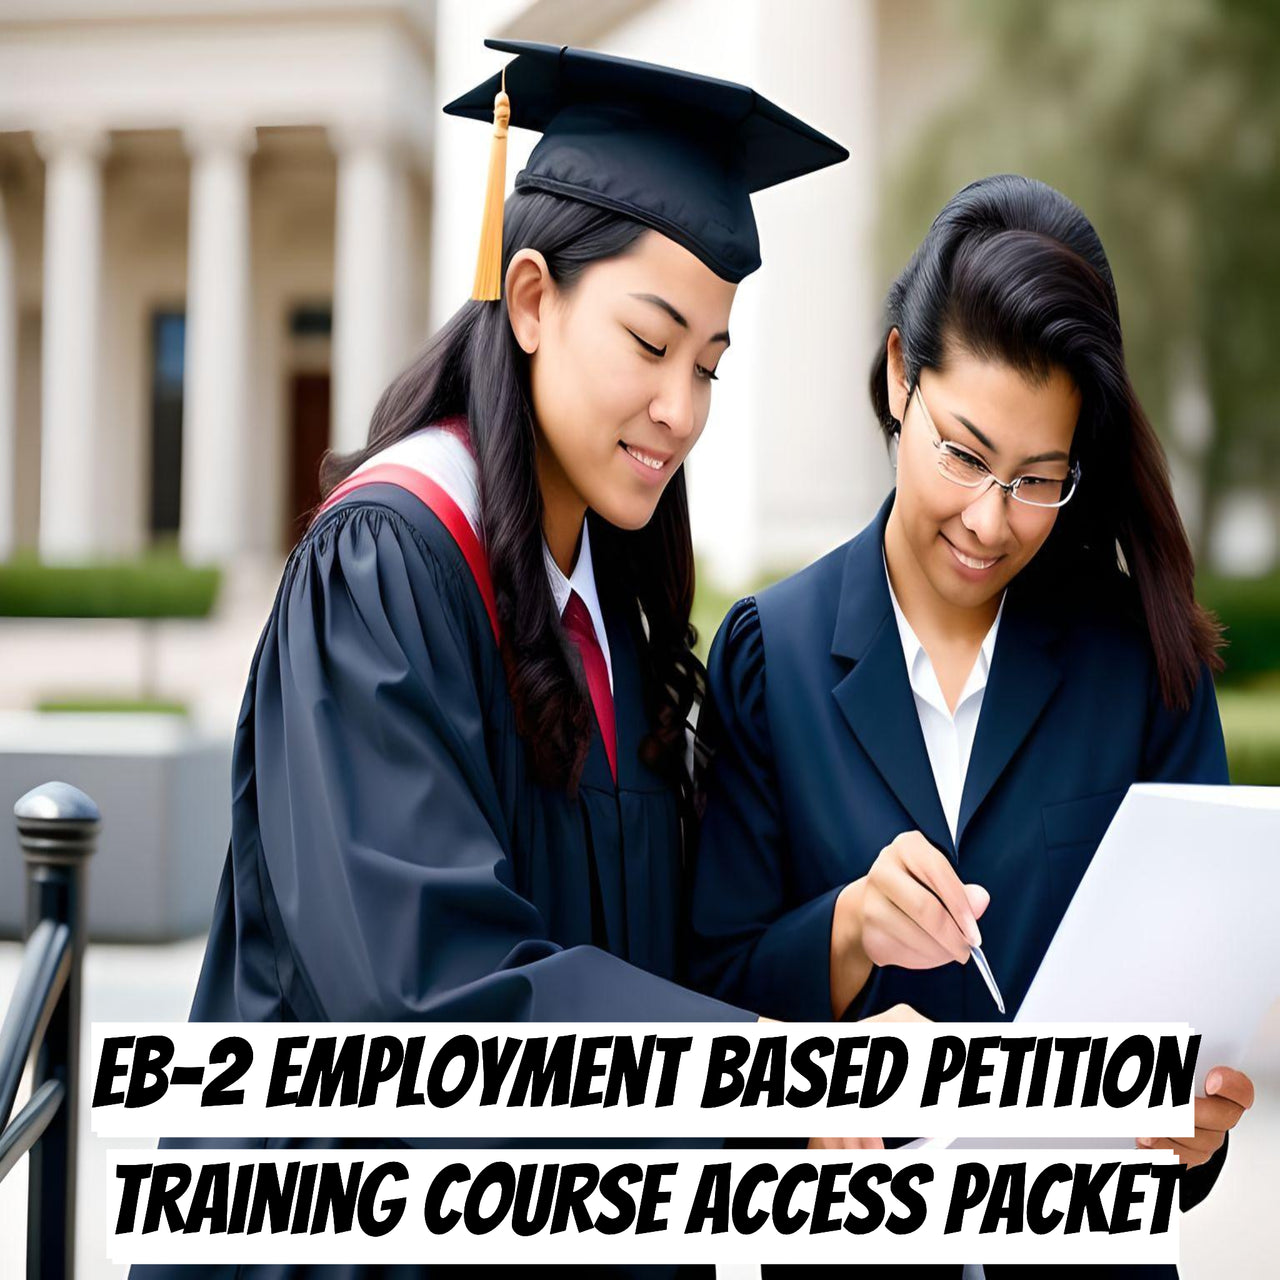 EB-2 Employment Based Petition Training Course Access Packet